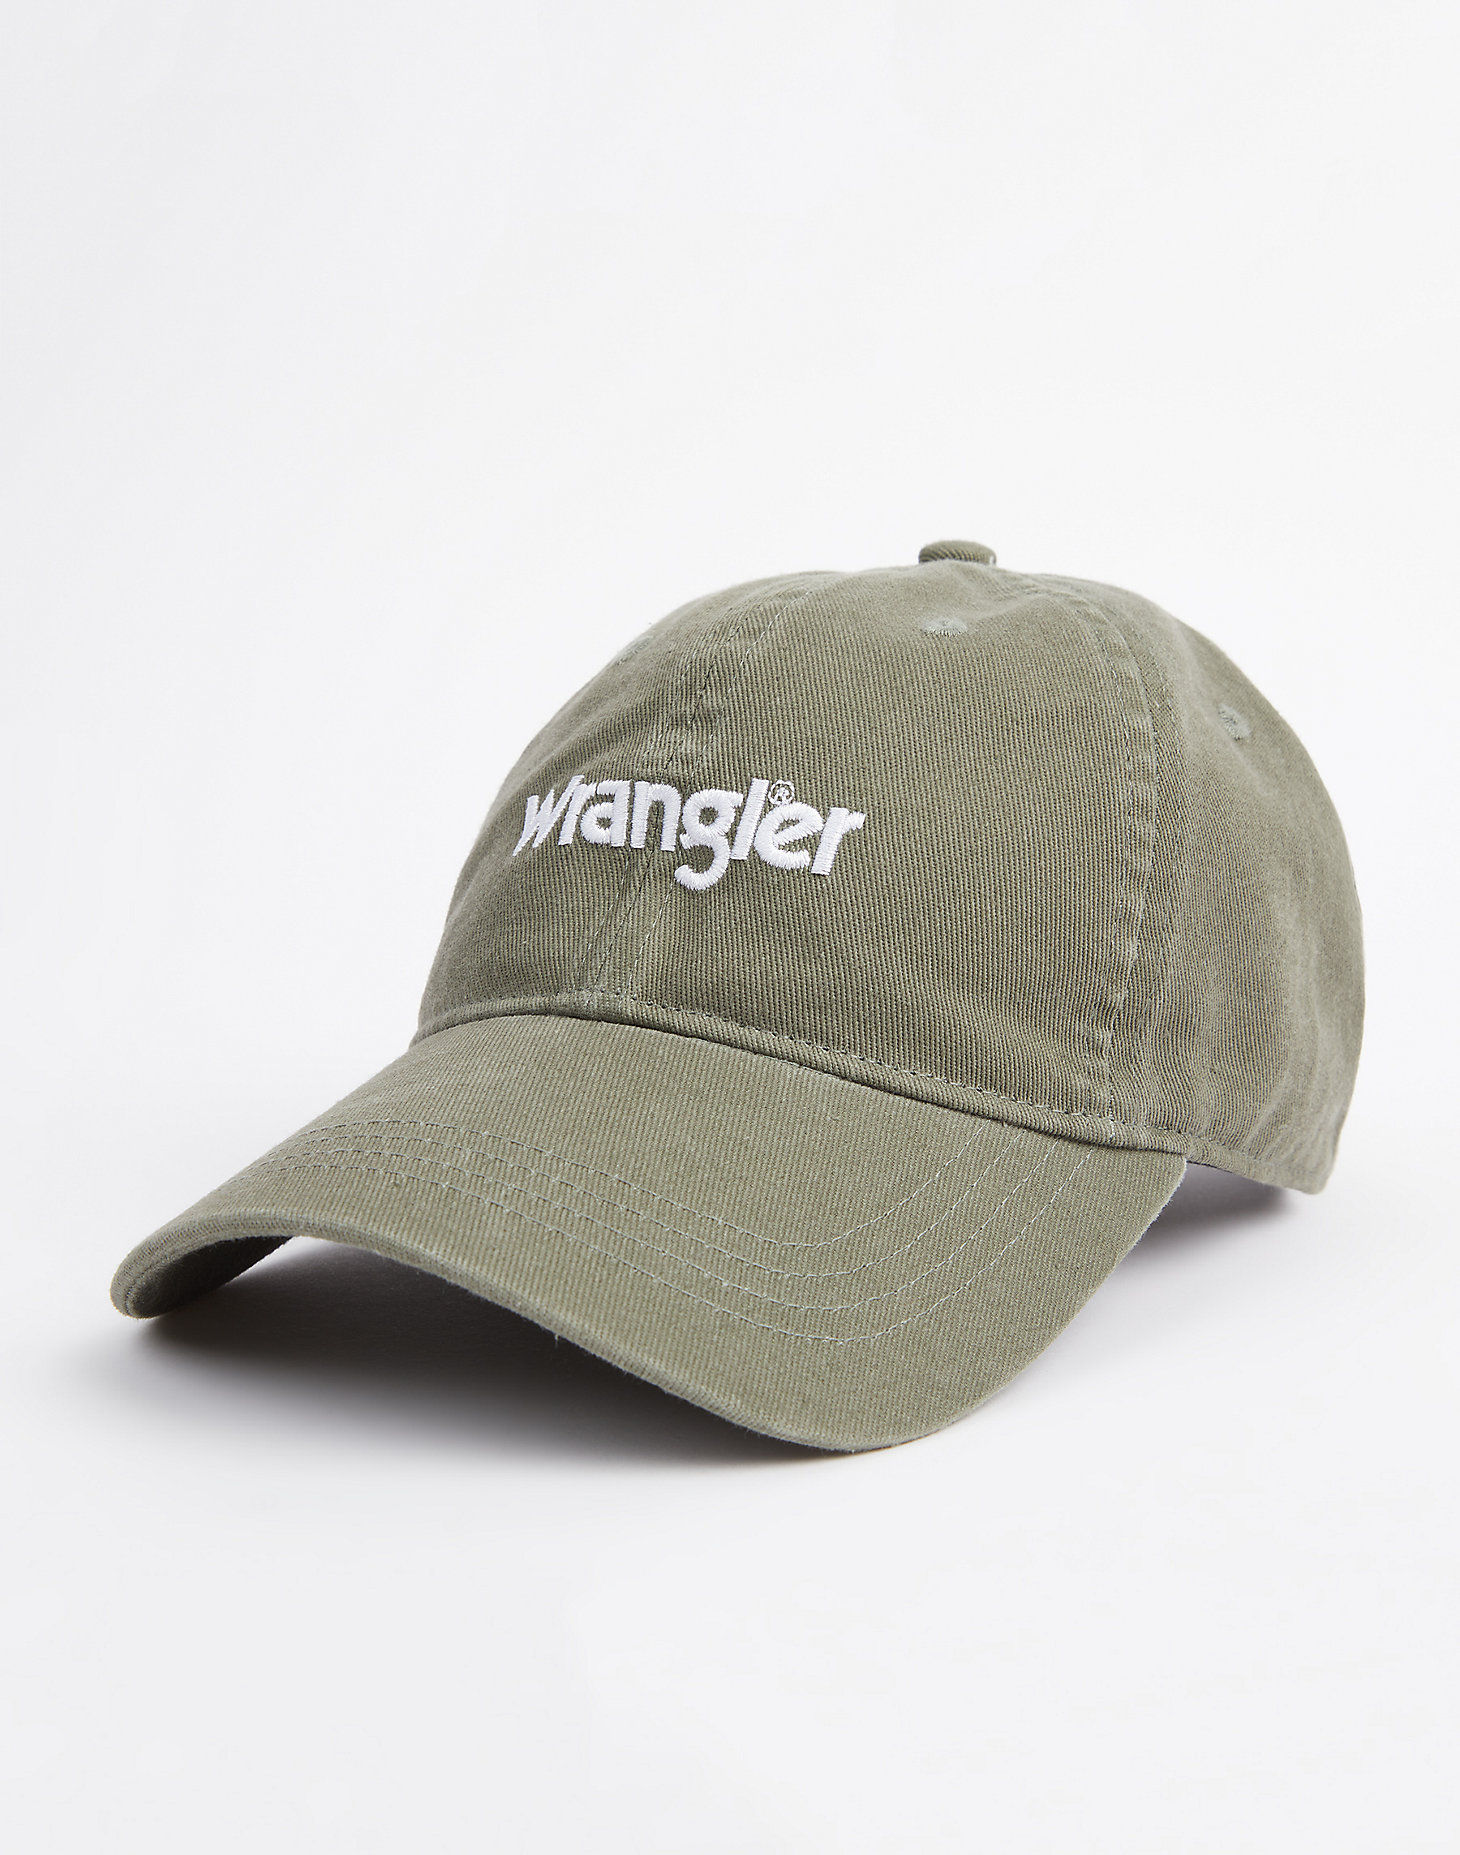 Washed Logo Cap in Oil Green alternative view 1